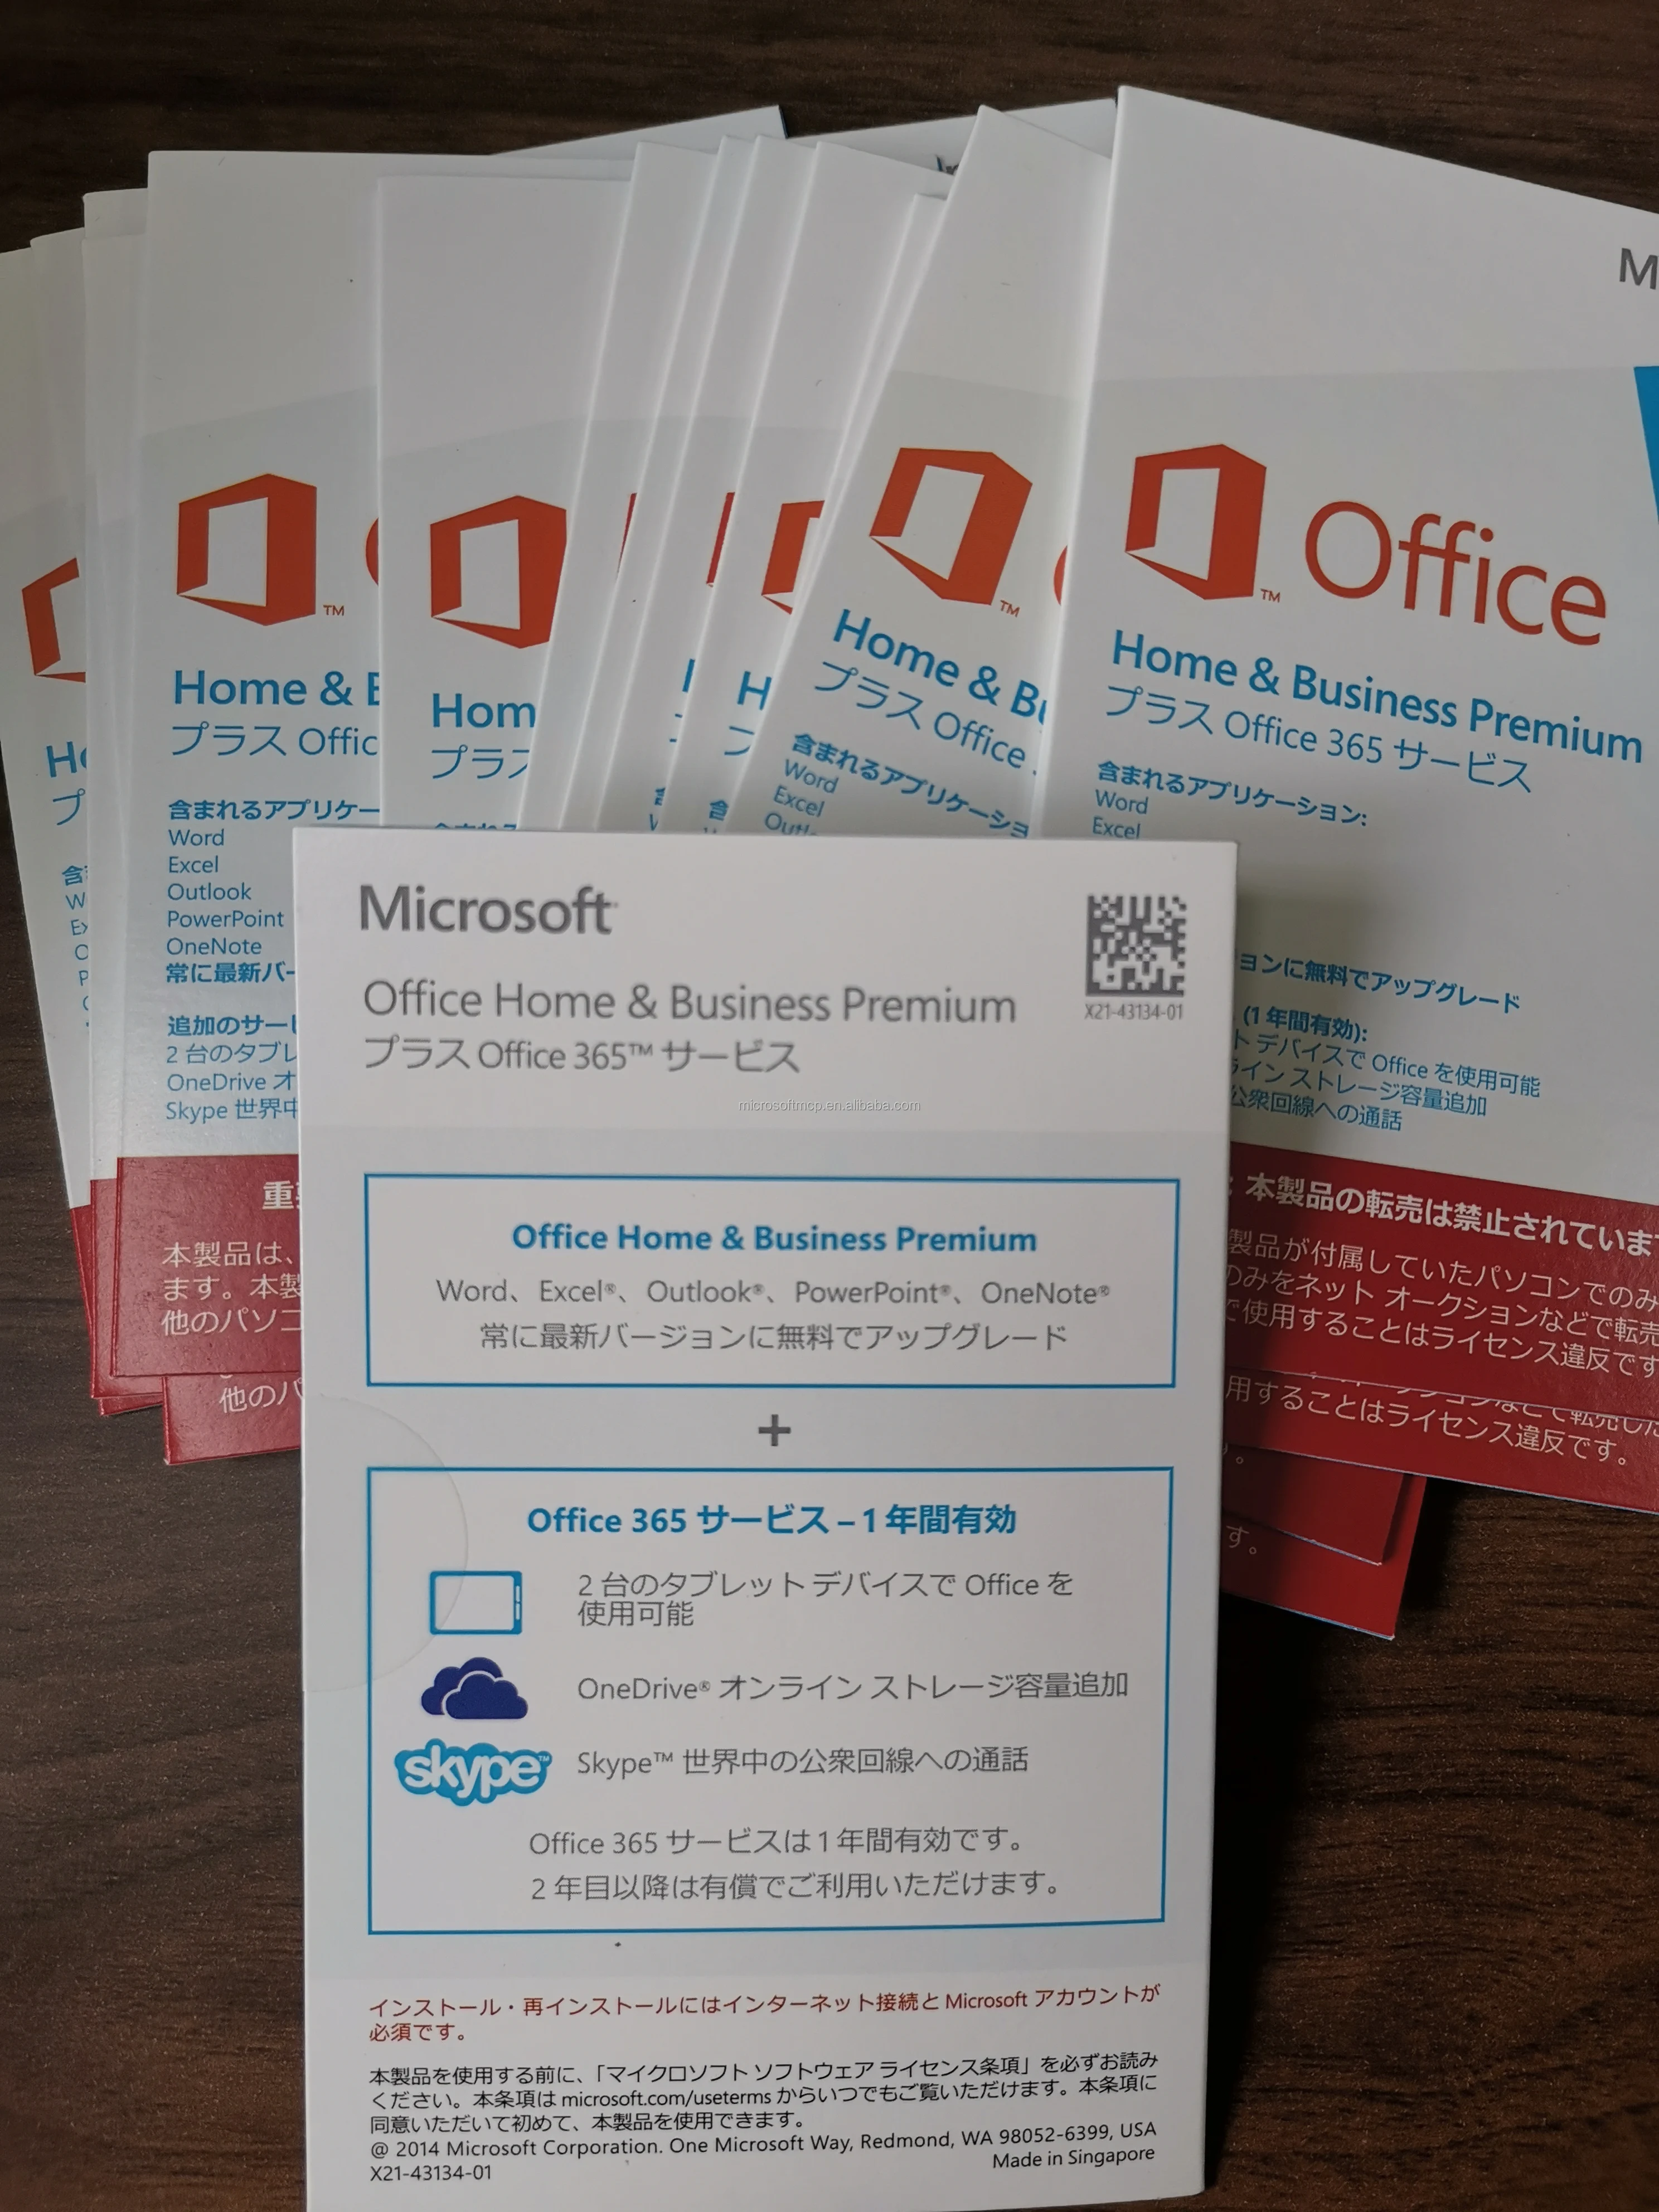 Used Globally Original Microsoft Office 365 Home And Business Premium Online Activation 100 Buy Office 365 Home And Business Microsoft Office 365 Office 365 Business Premium Product On Alibaba Com